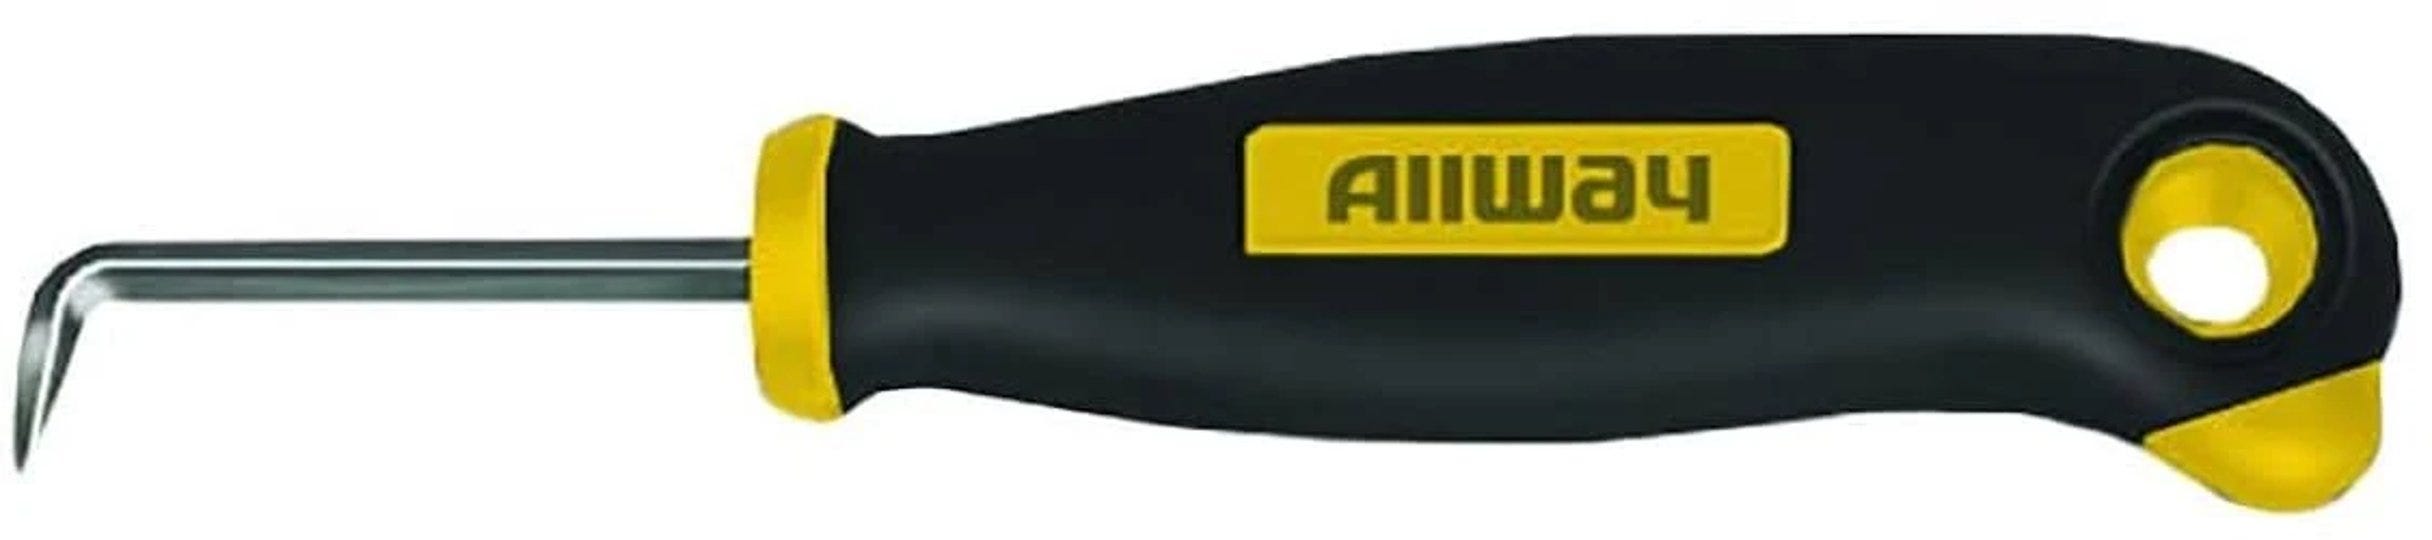 allway-gcr-grout-or-caulk-removal-tool-1